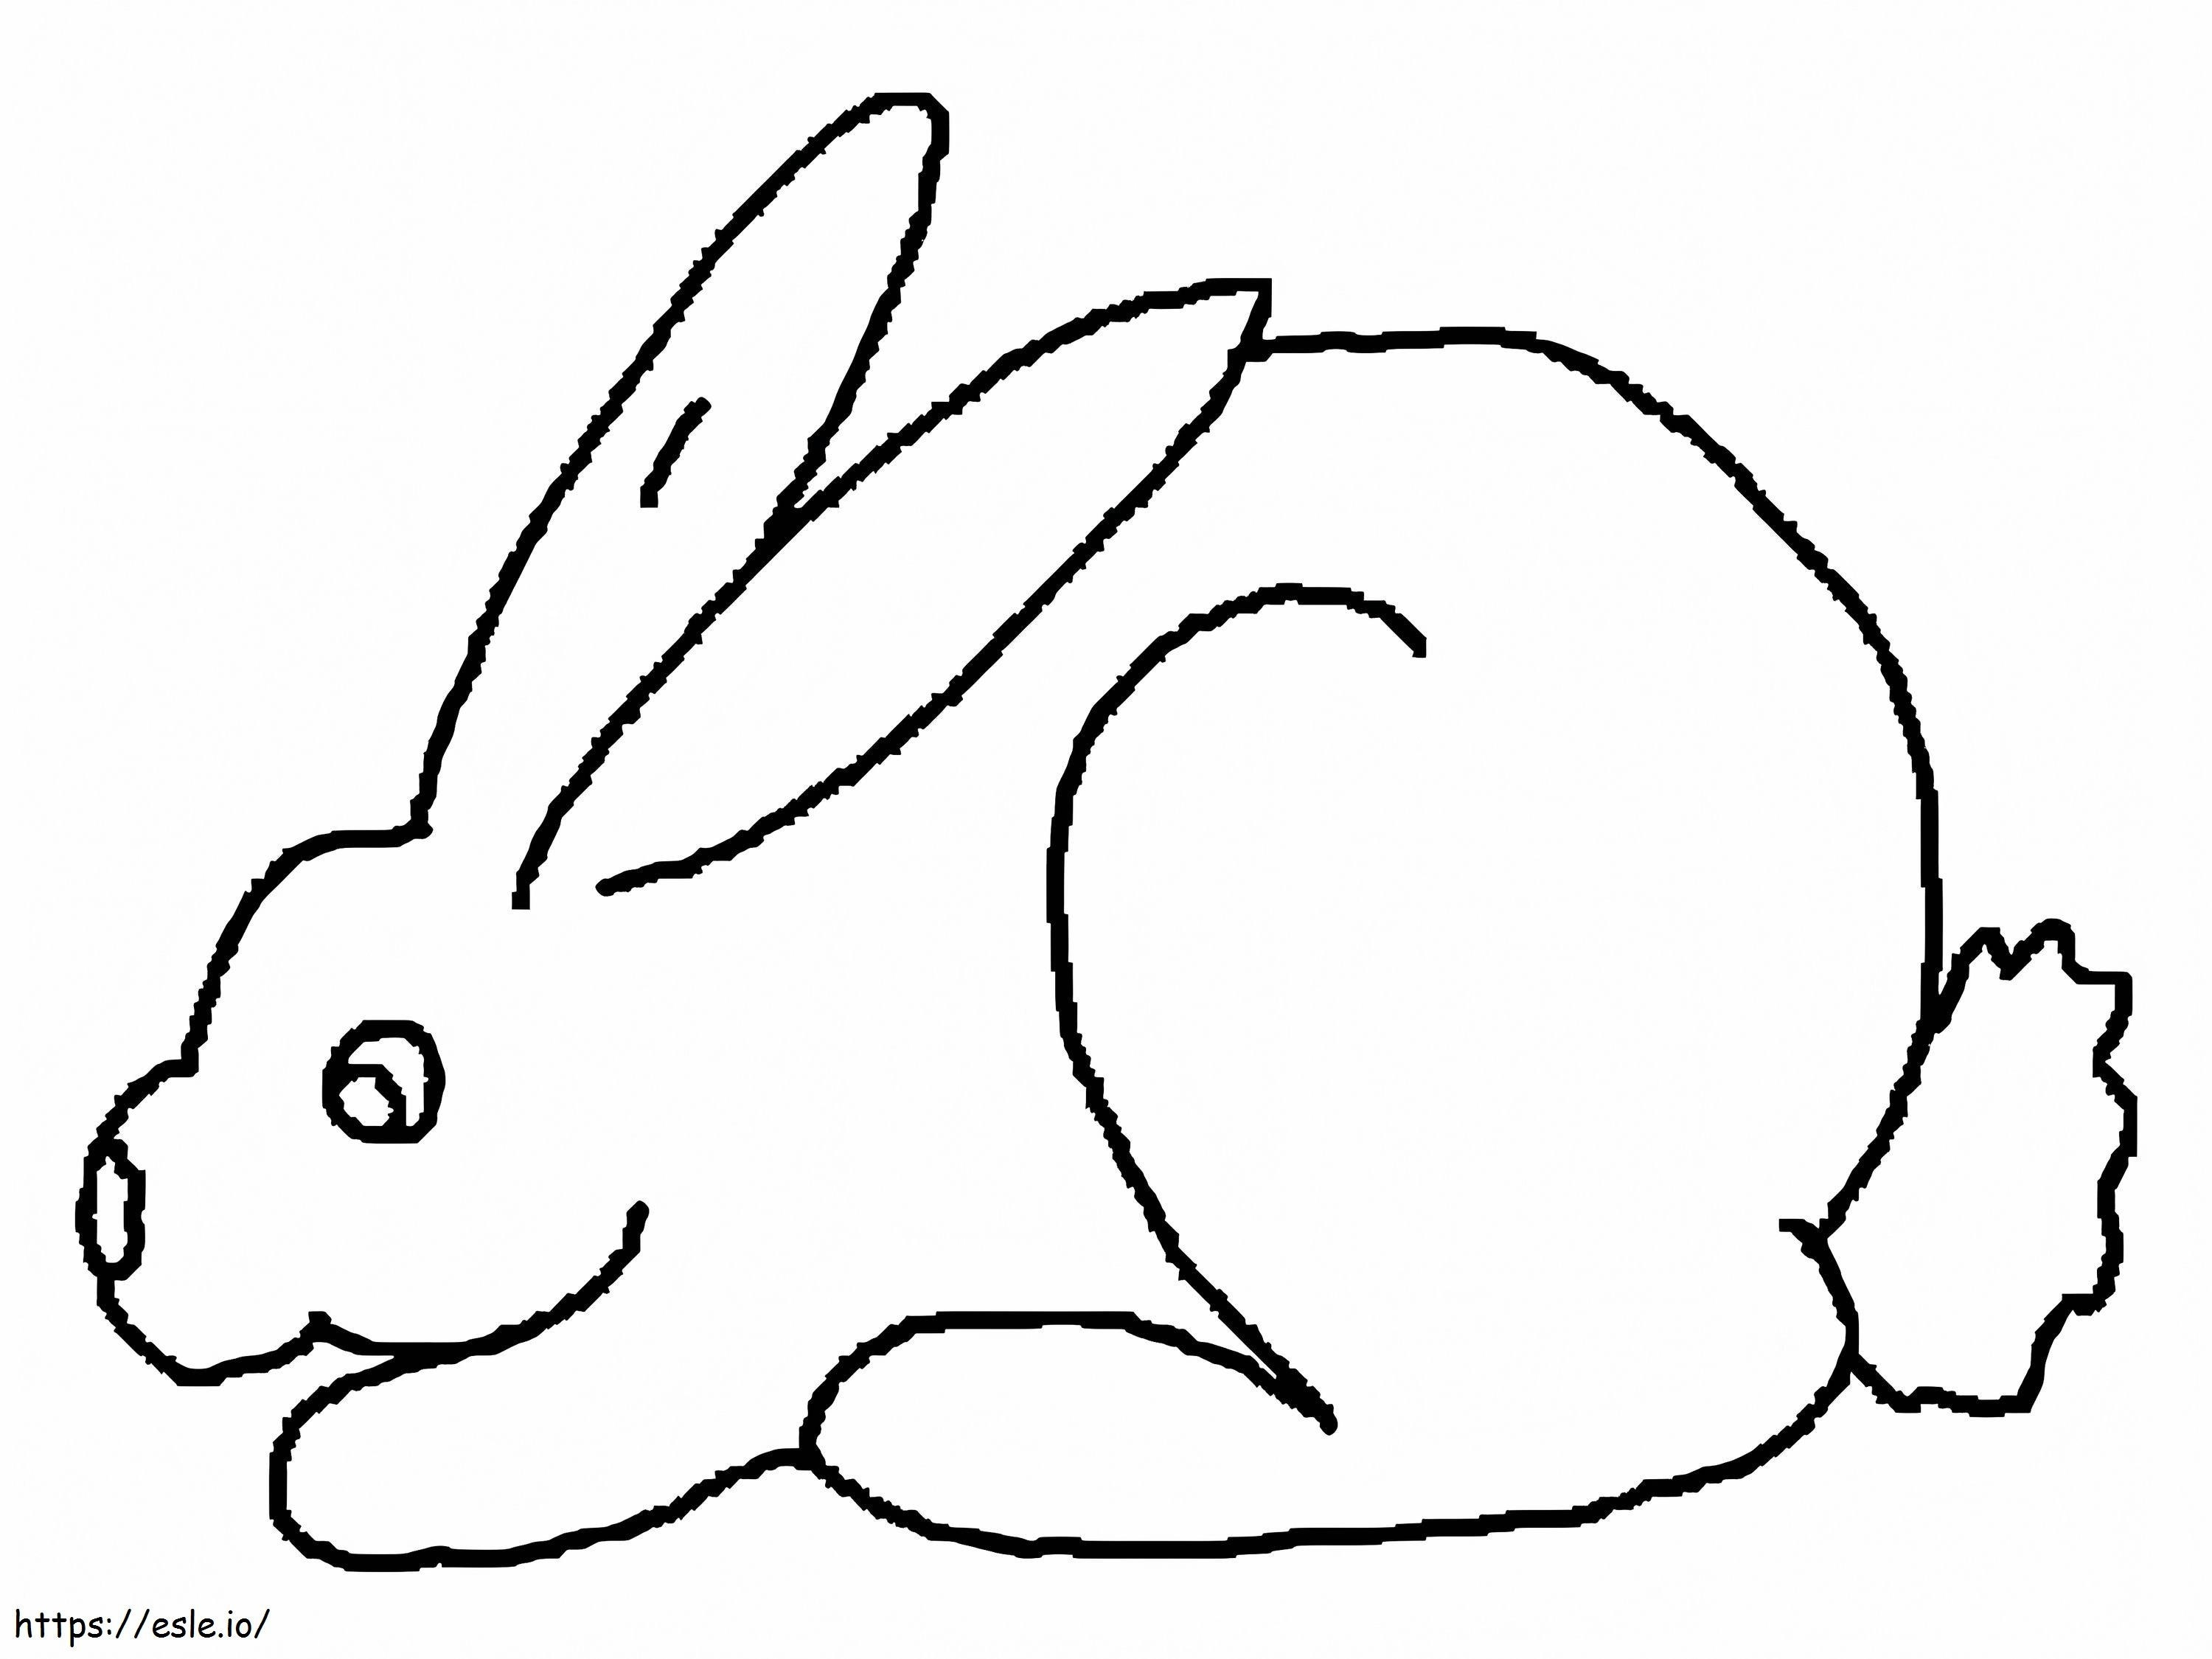 A Simple Rabbit coloring page